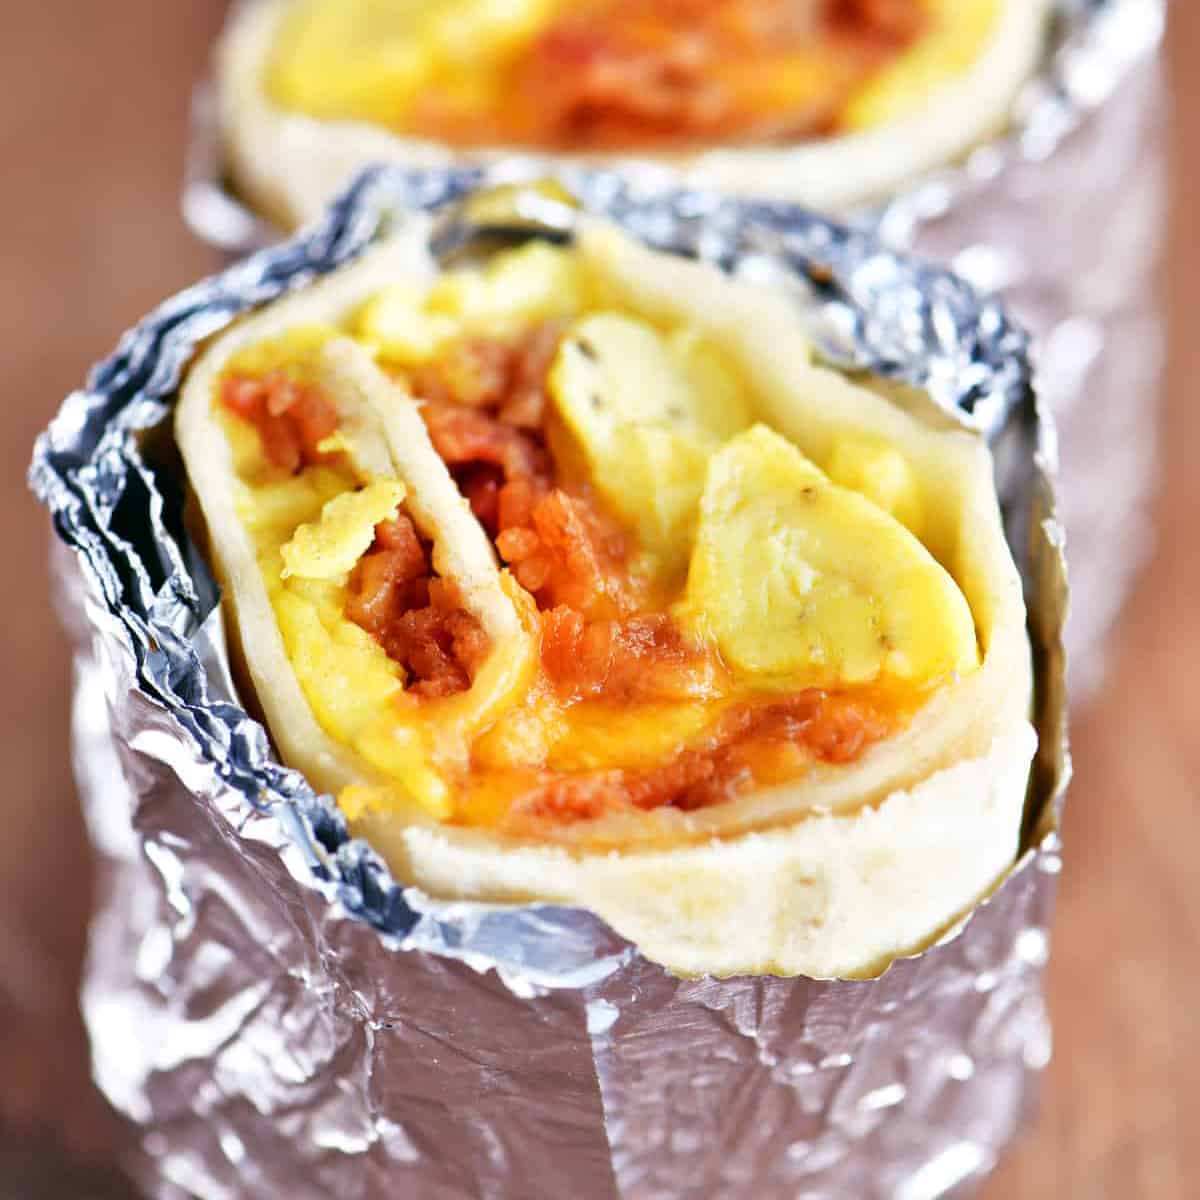 bacon egg and cheese breakfast burrito wrapped in foil.